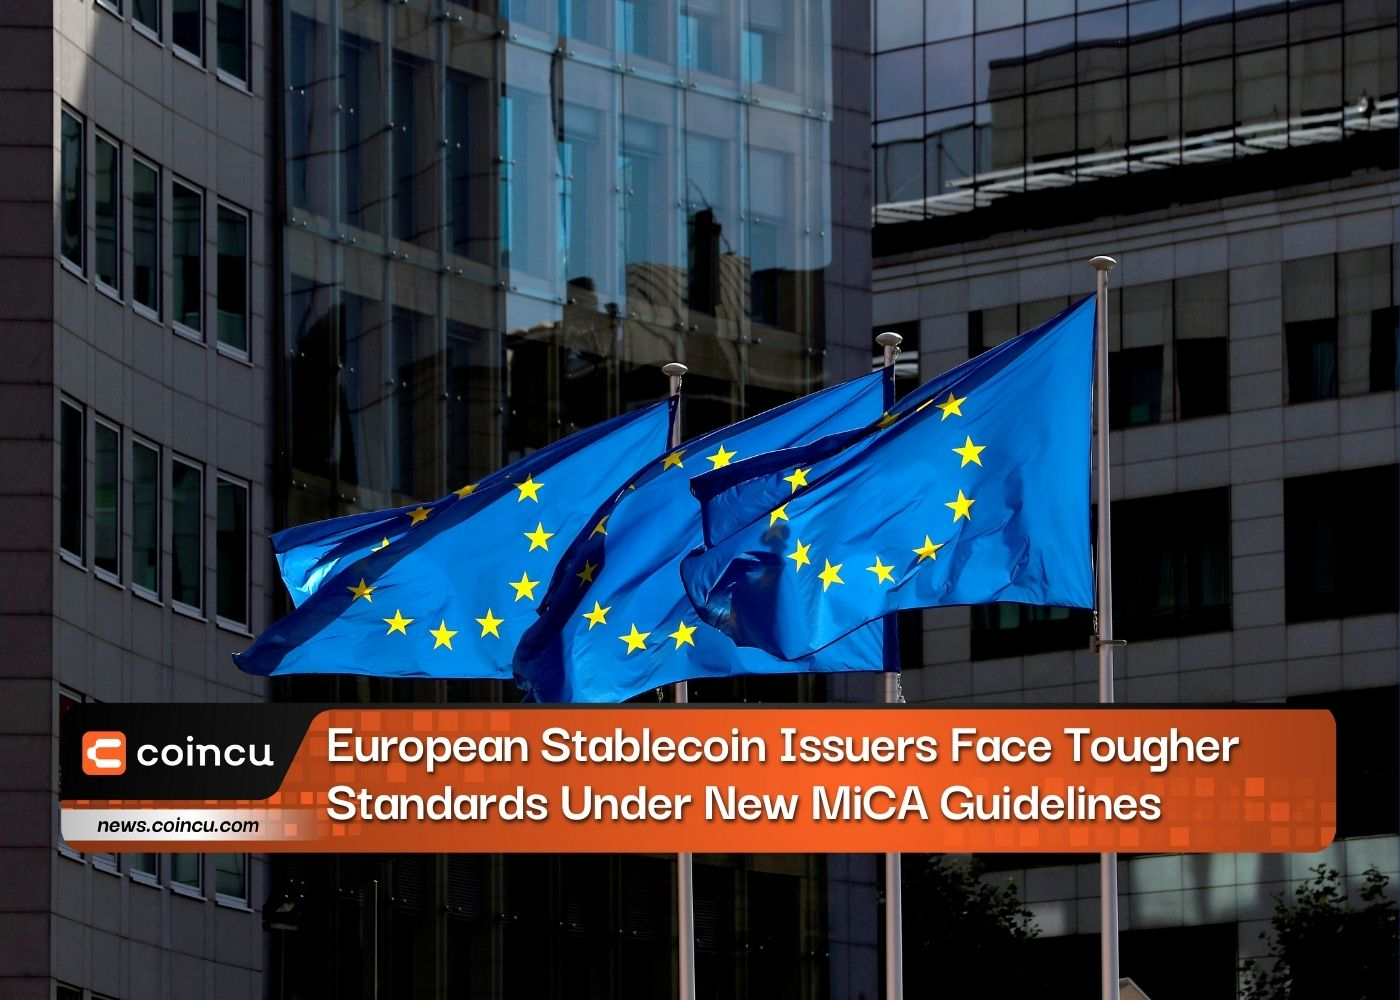 European Stablecoin Issuers Face Tougher Standards Under New MiCA Guidelines